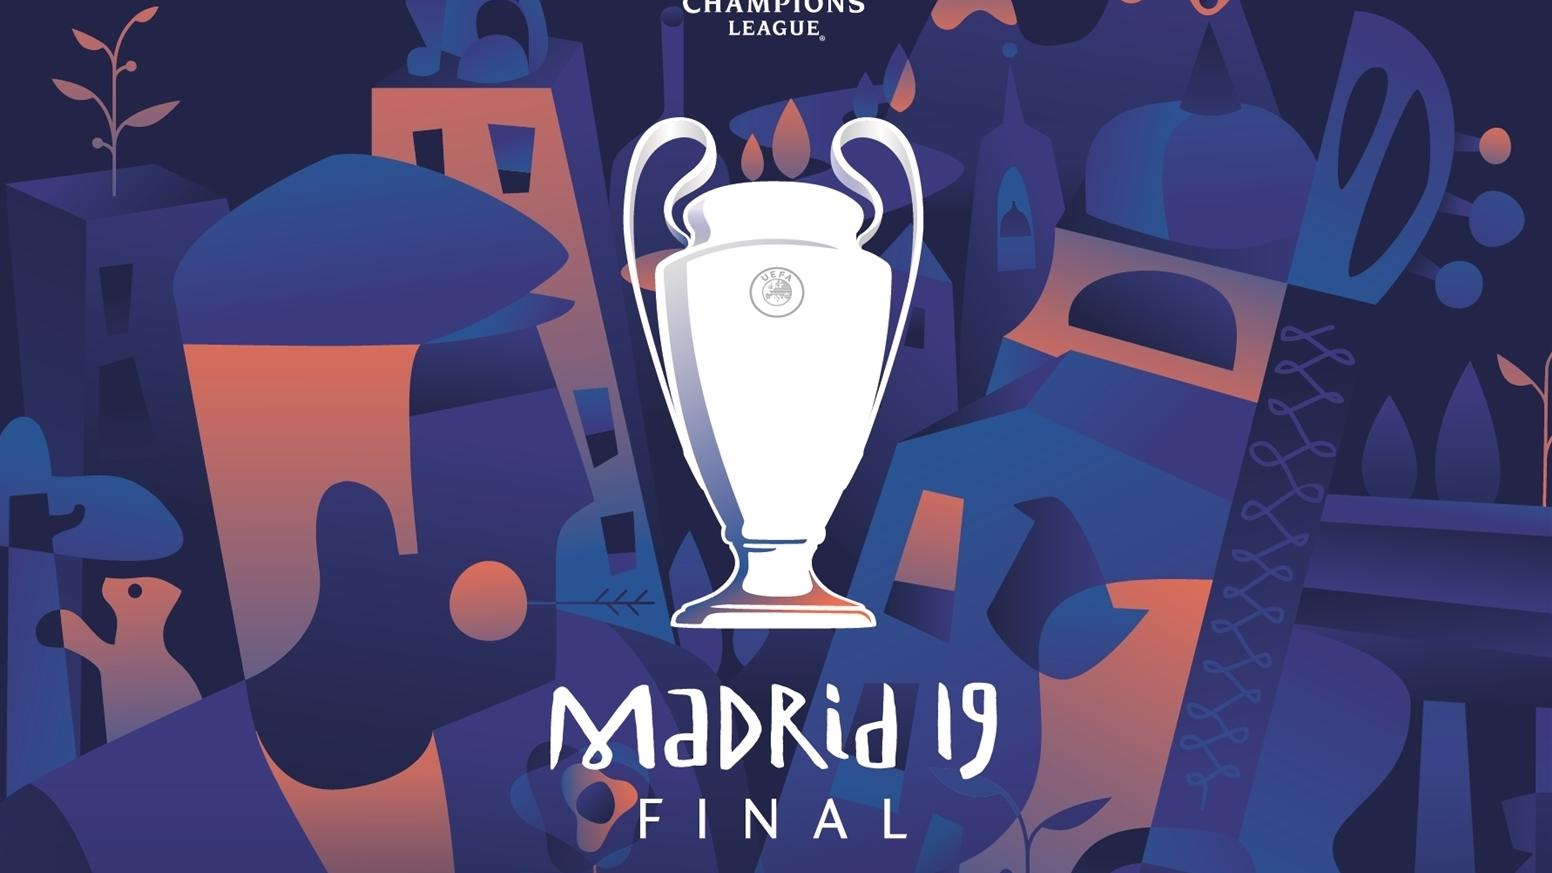 tickets for champions league final 2019